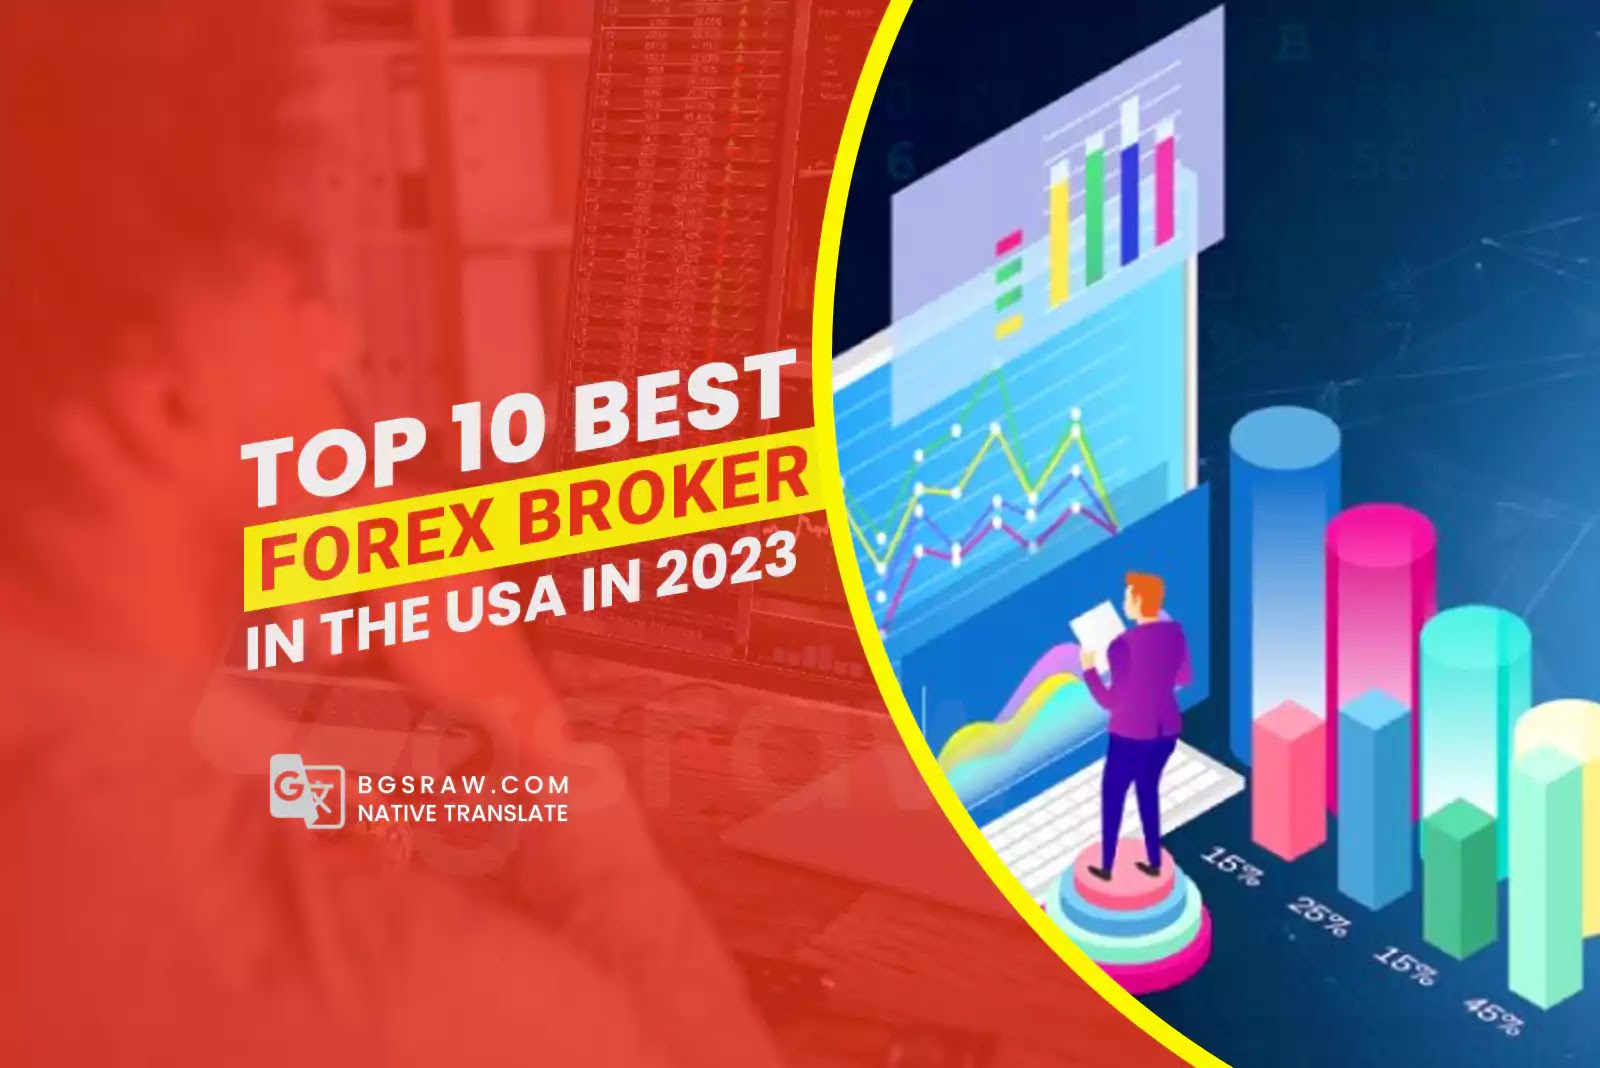 Top 10 Best Forex Broker in the USA in 2023